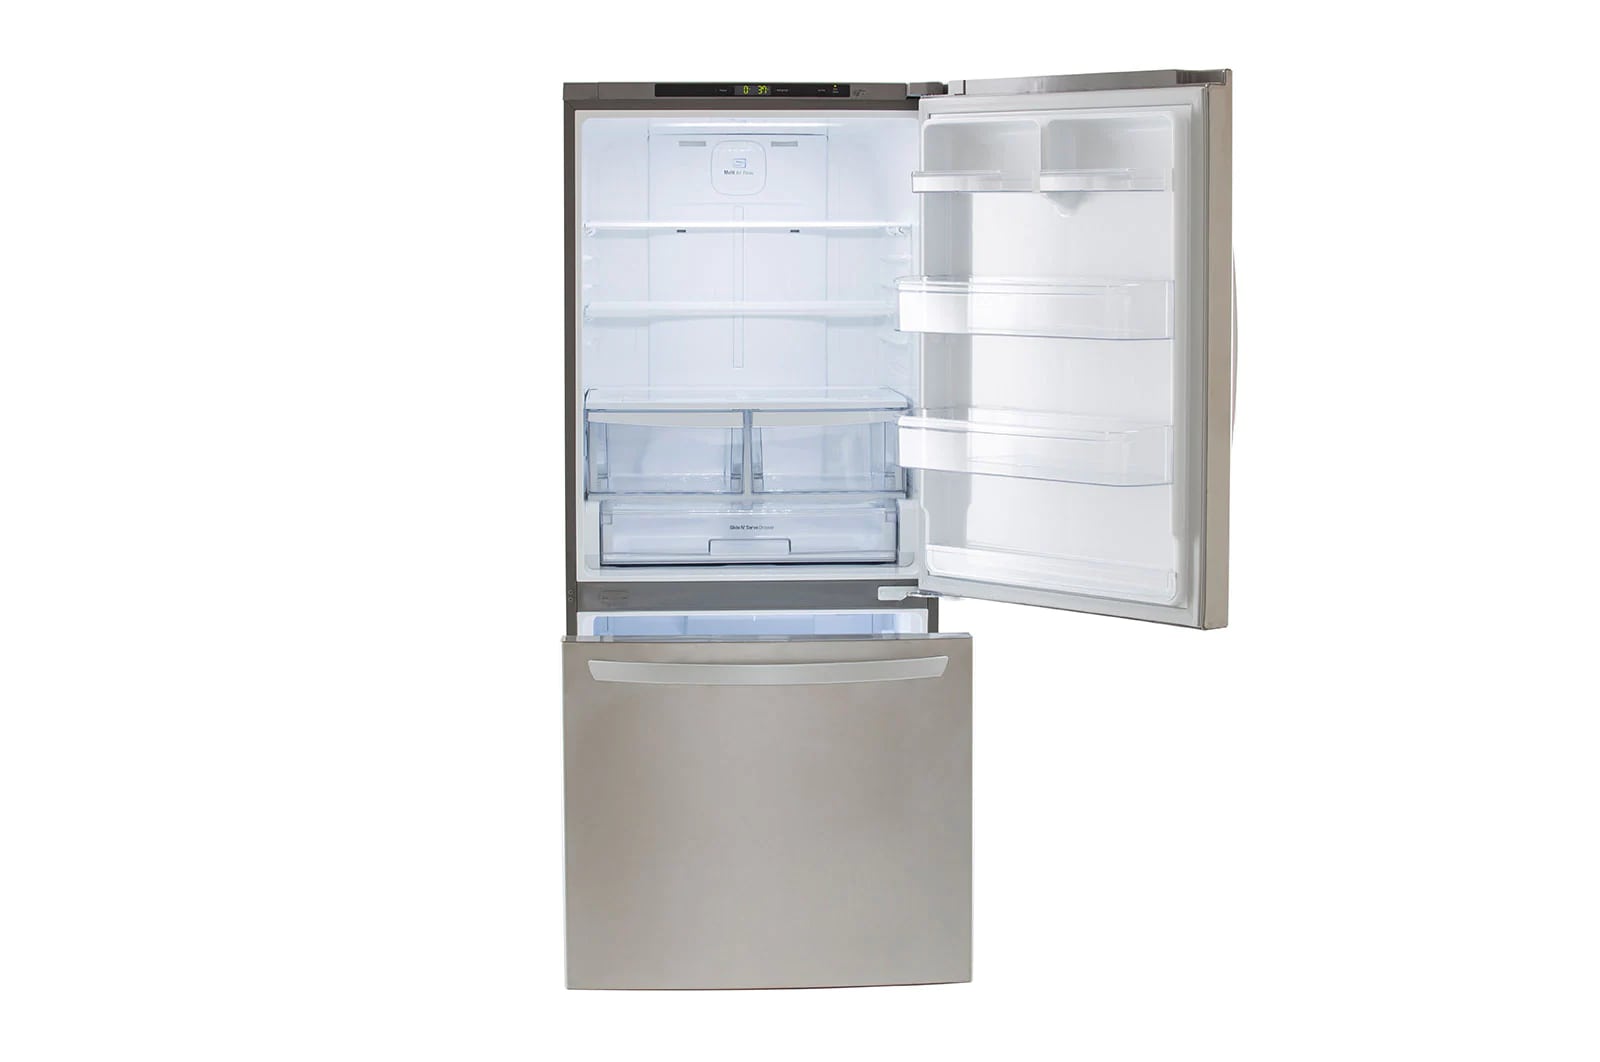 LG - 29.75 Inch 22.1 cu. ft Bottom Mount Refrigerator in Stainless - LRDNS2200S